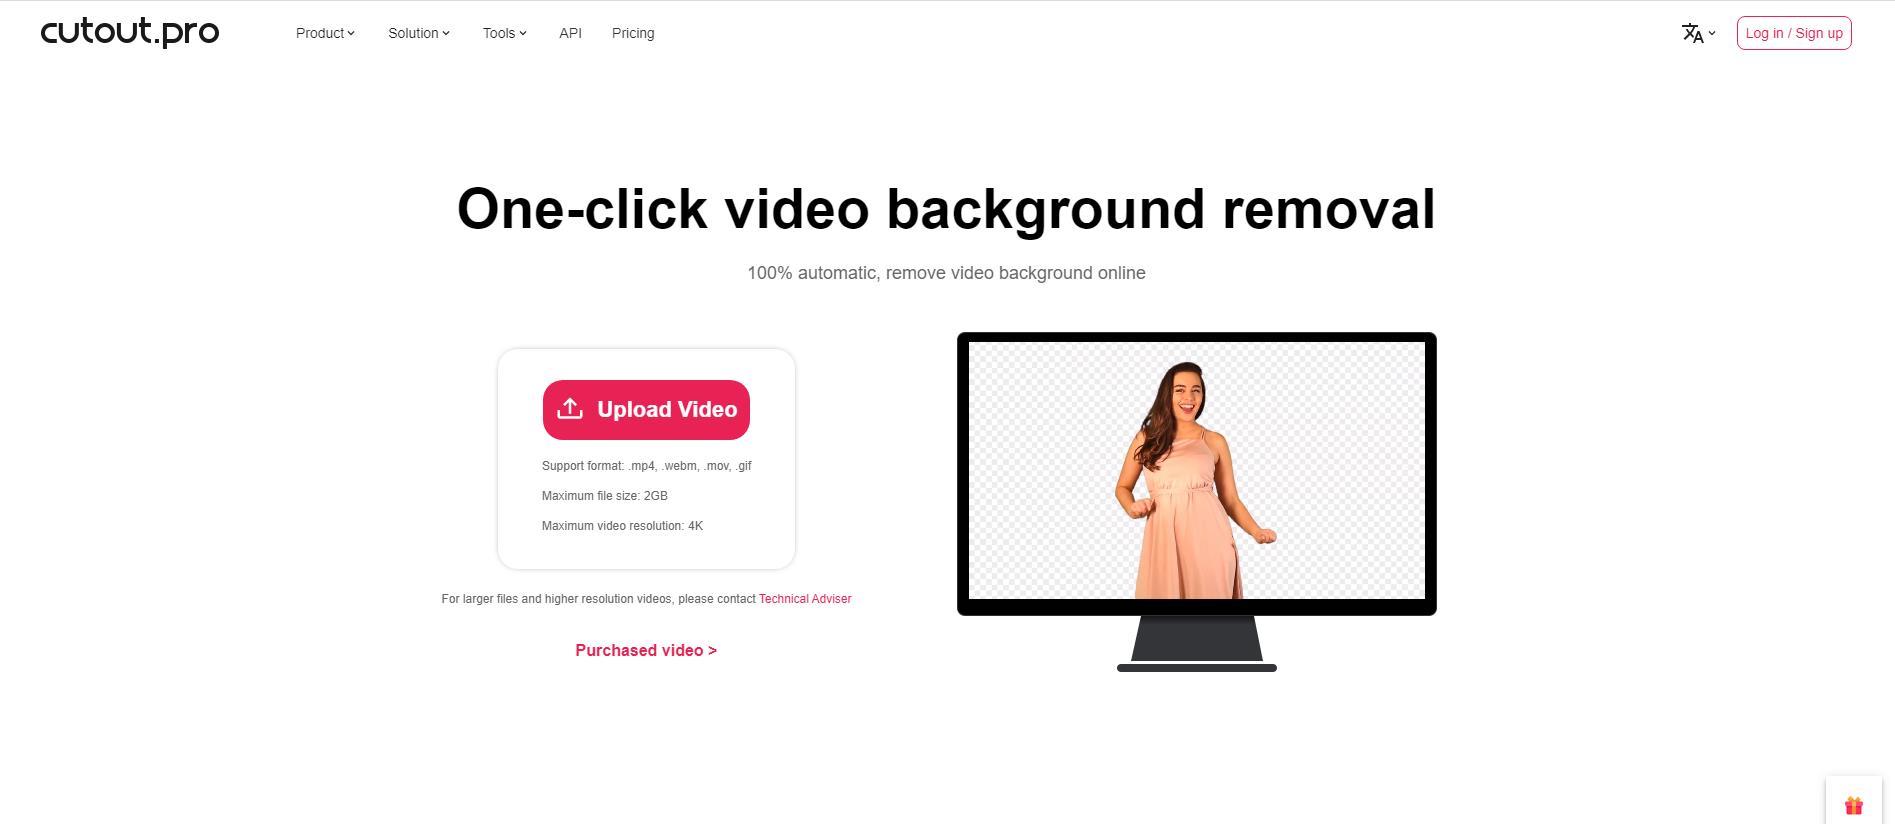 cutout.pro video background remover